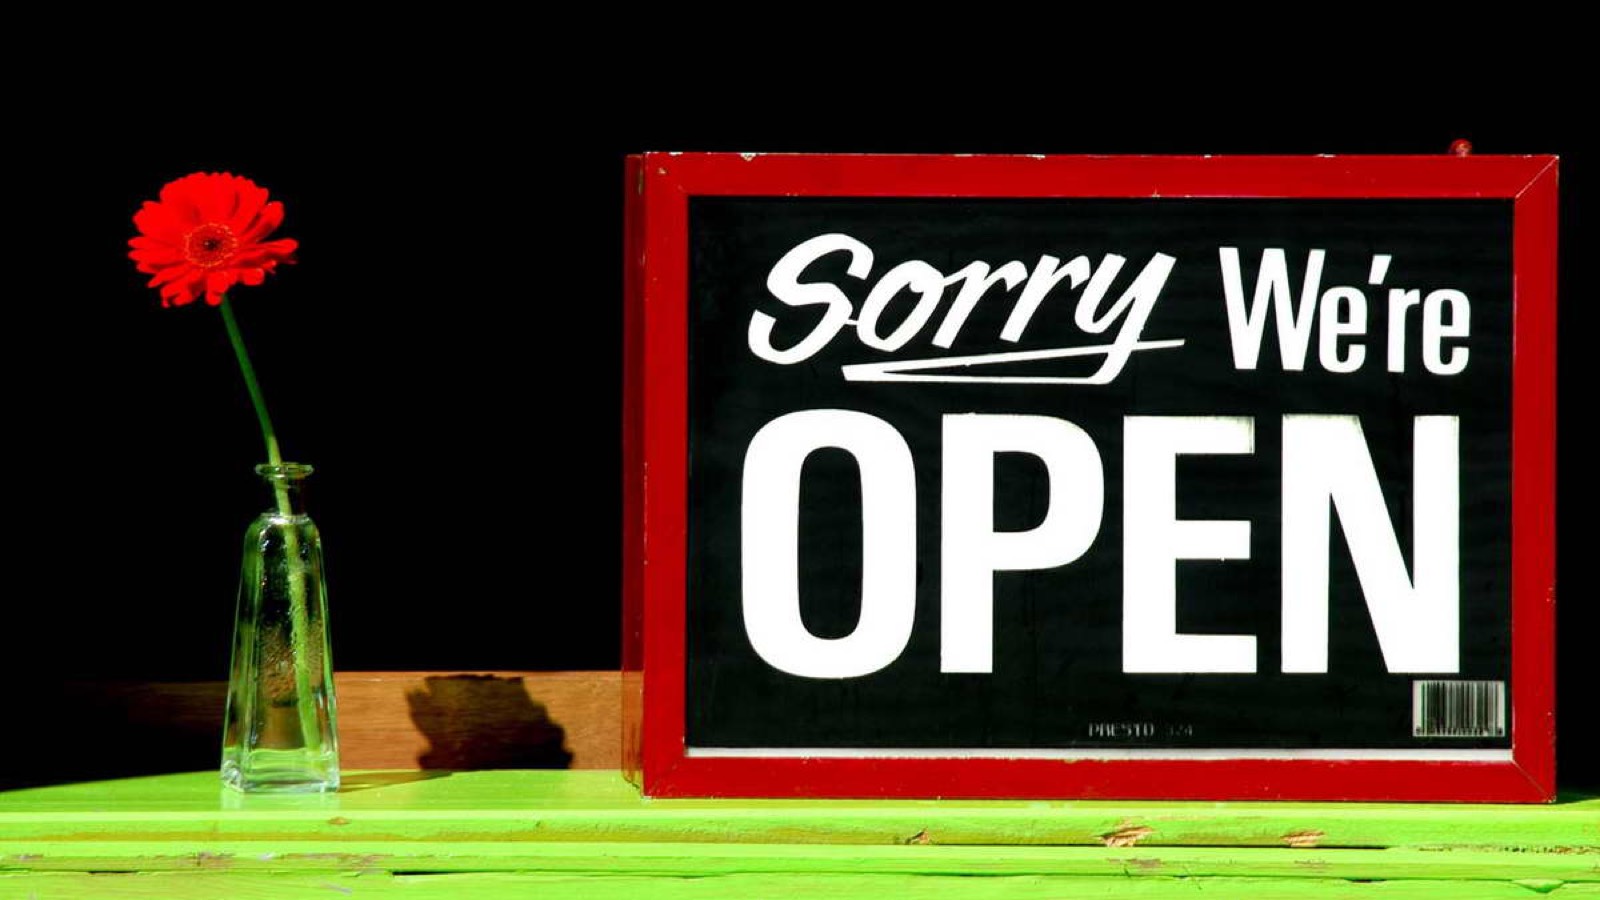 Sorry, we’re open sign in windowsill.